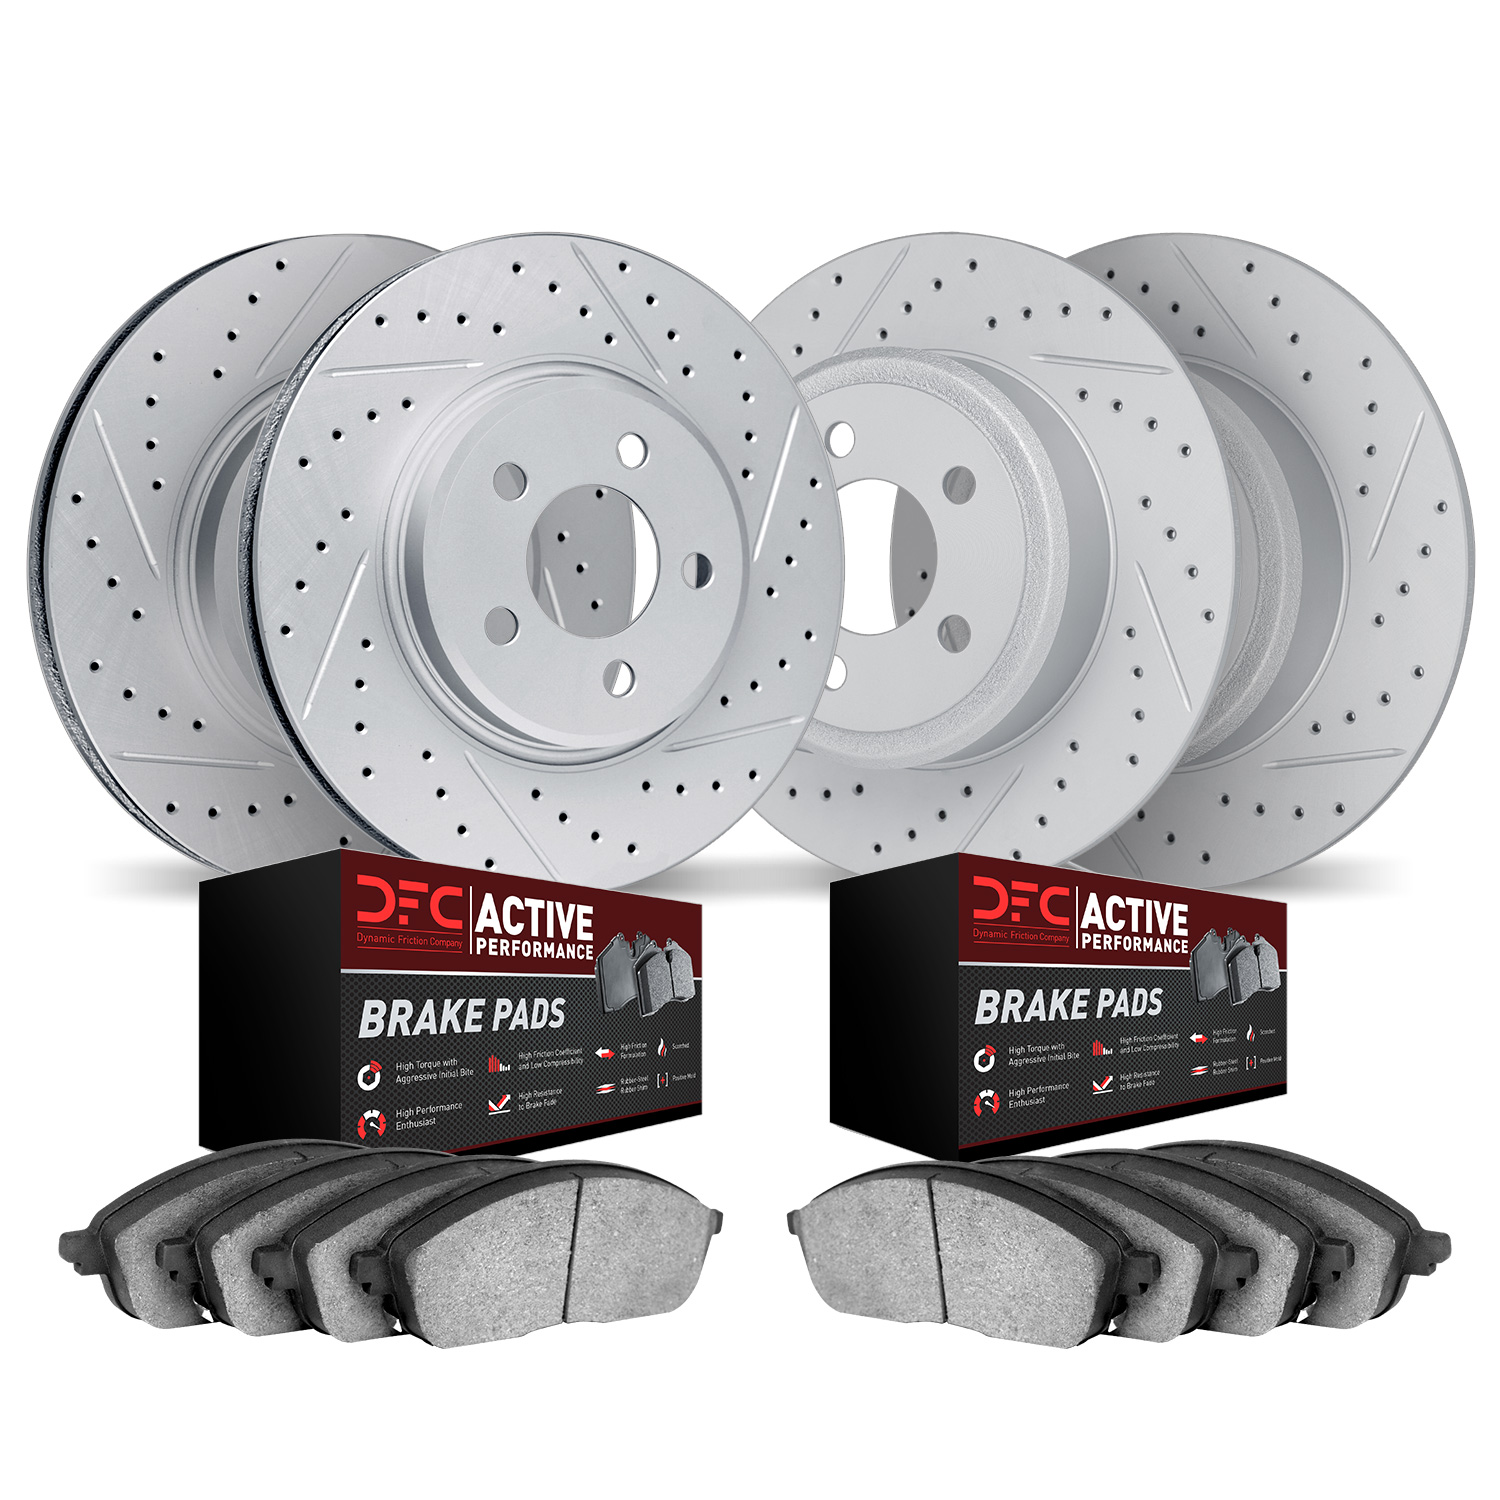 2704-74012 Geoperformance Drilled/Slotted Brake Rotors with Active Performance Pads Kit, 2005-2013 Audi/Volkswagen, Position: Fr